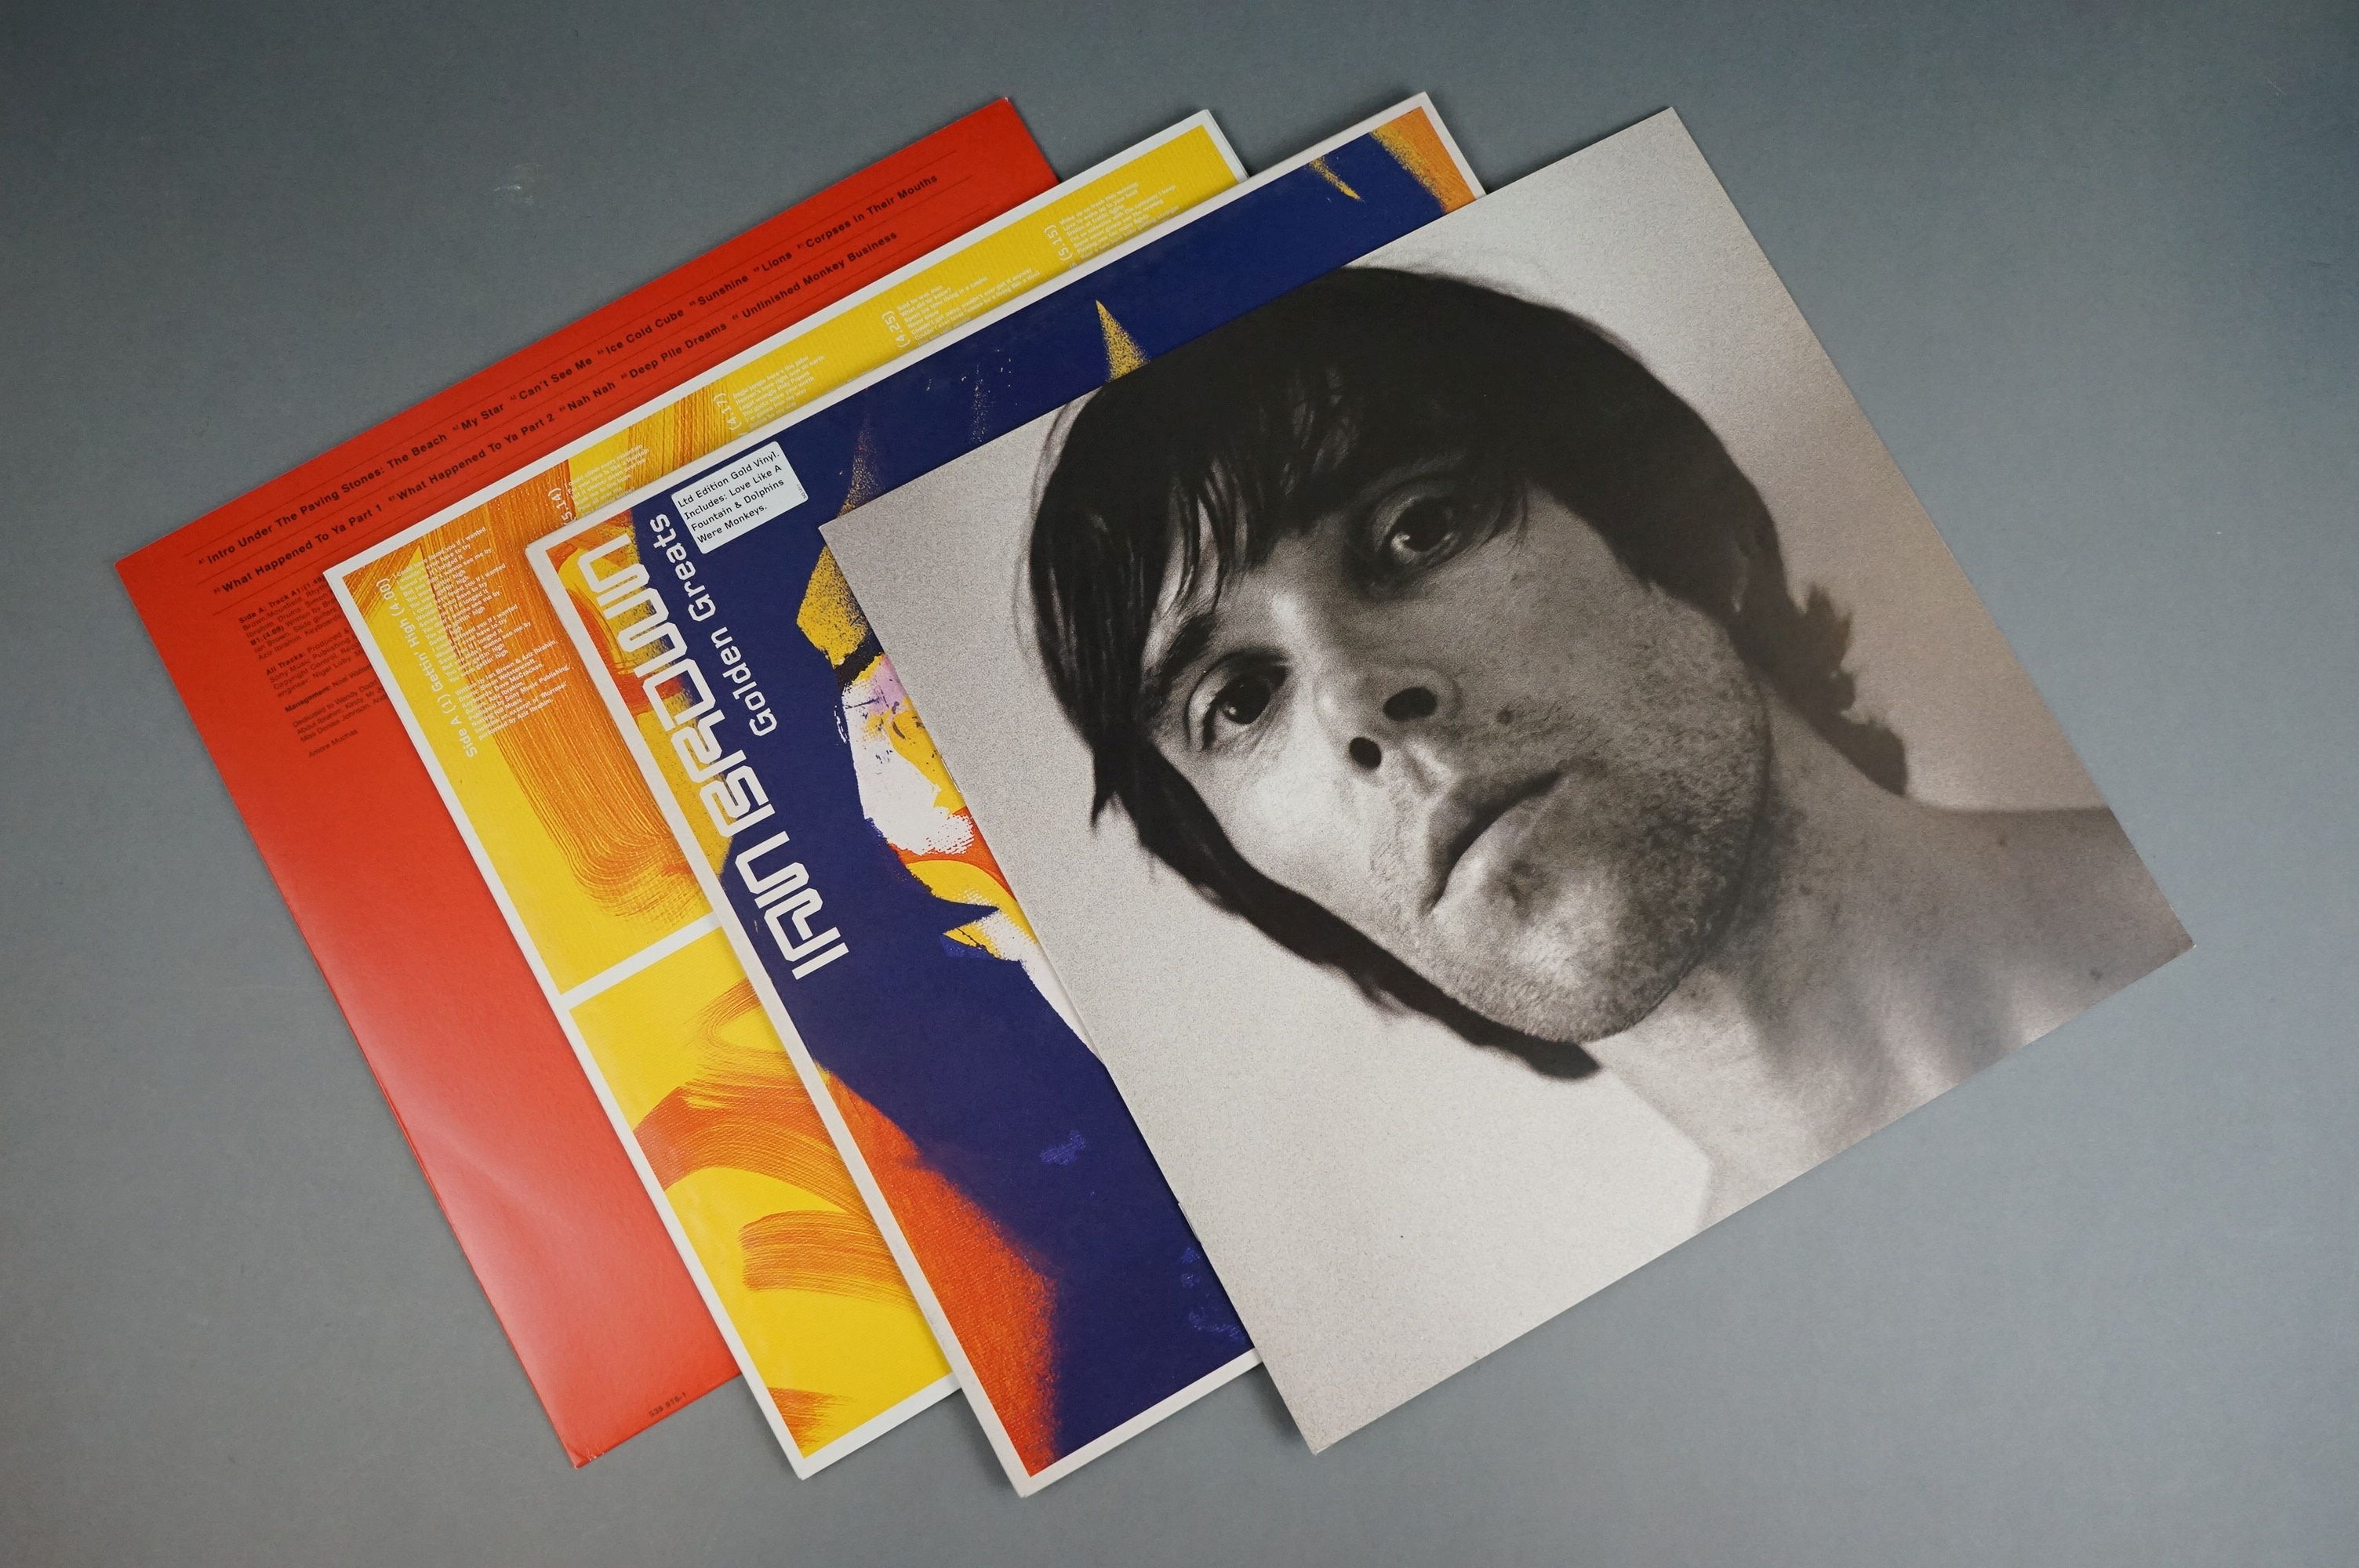 Vinyl - Two Ian Brown LPs on Polydor to include Unfinished Monkey Business 539916-1 ltd edn gatefold - Image 3 of 12